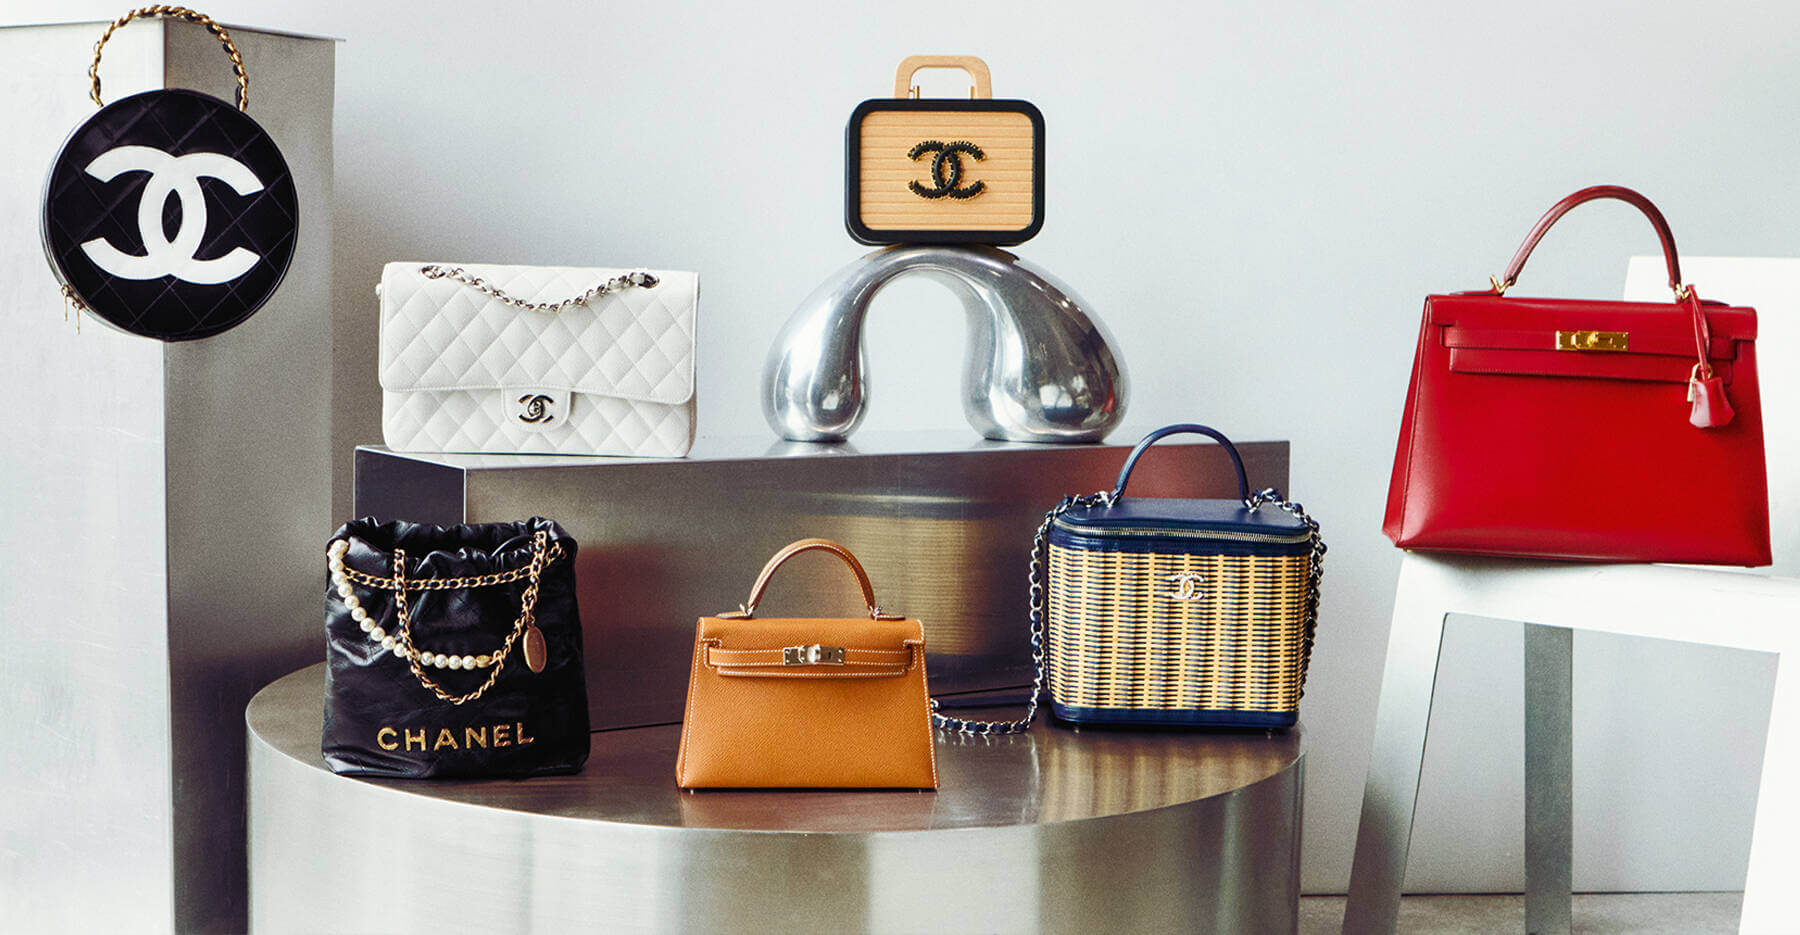 Who'd spend £25,000 on a secondhand bag? As the rich drop huge